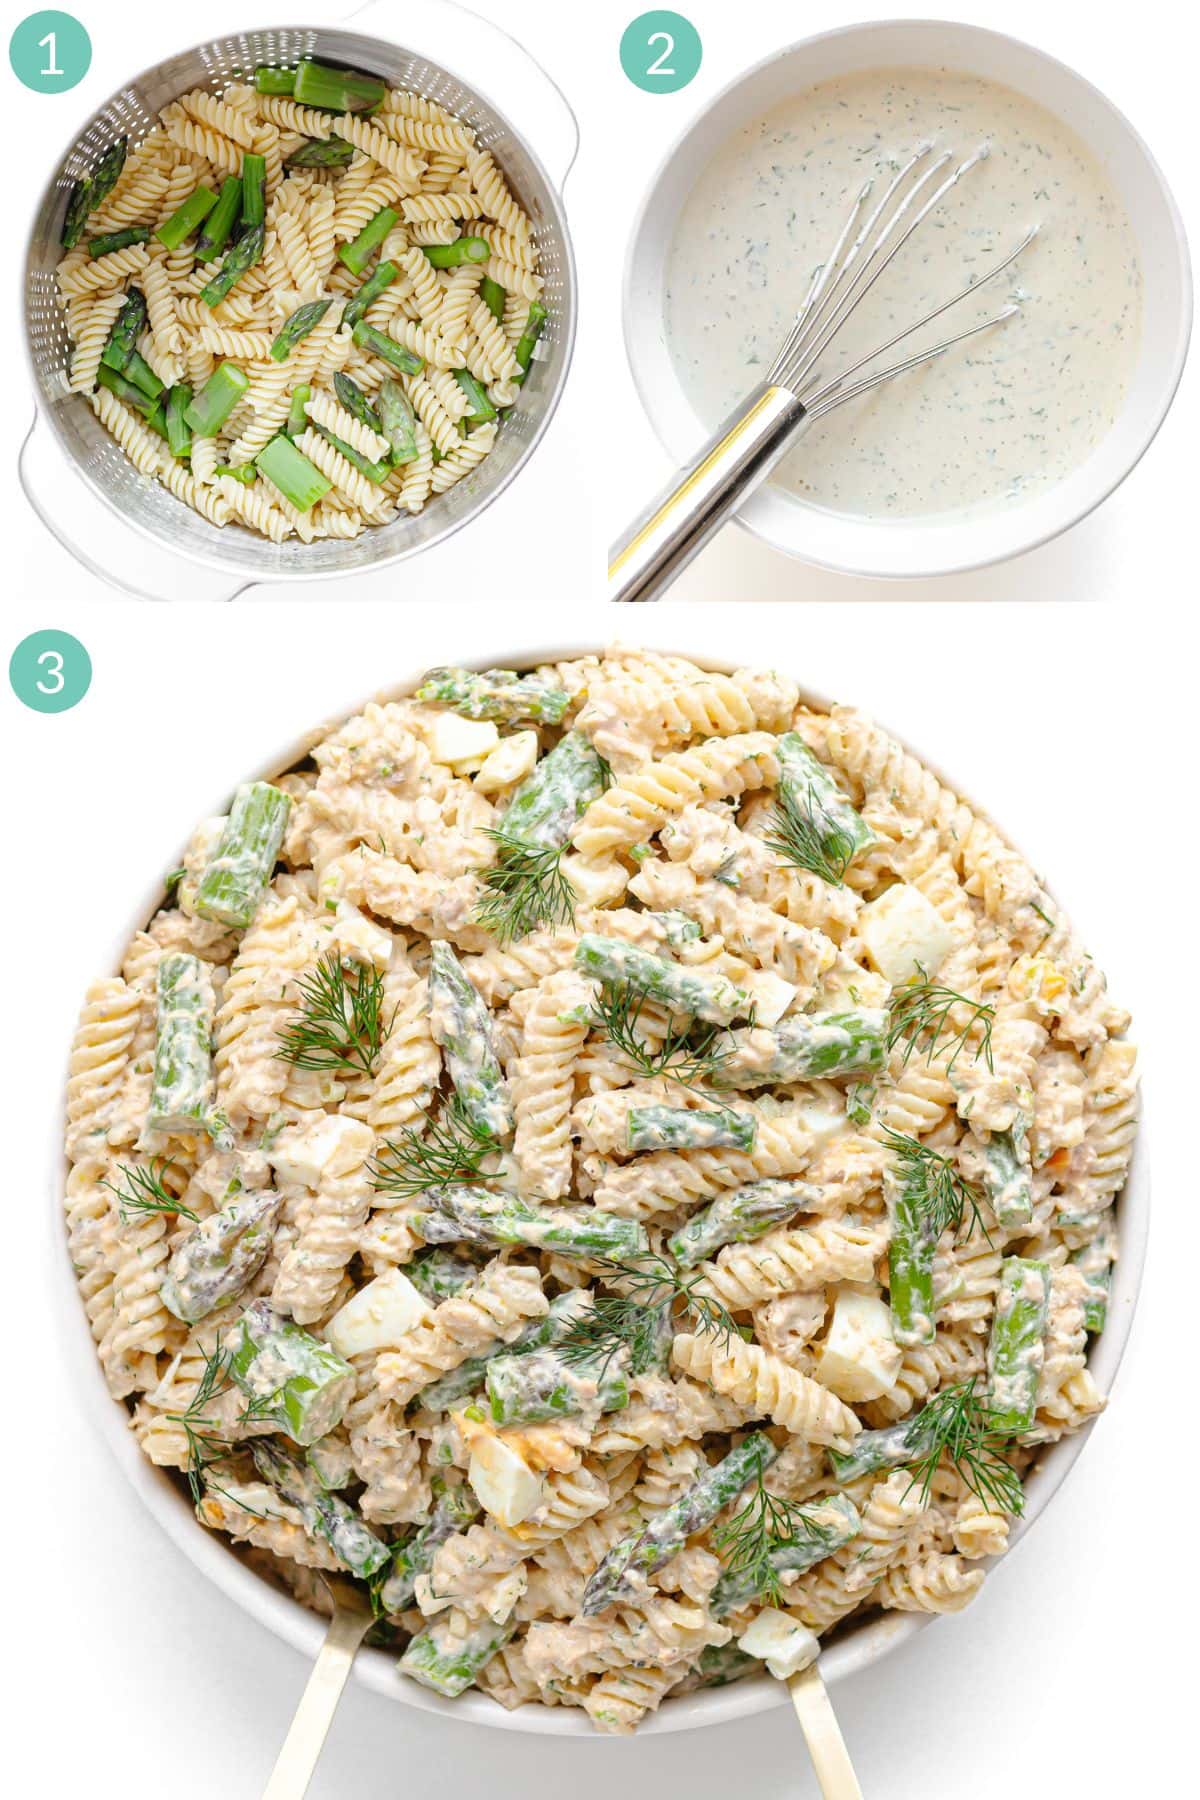 Numbered photo collage showing how to make Salmon Asparagus Pasta Salad.